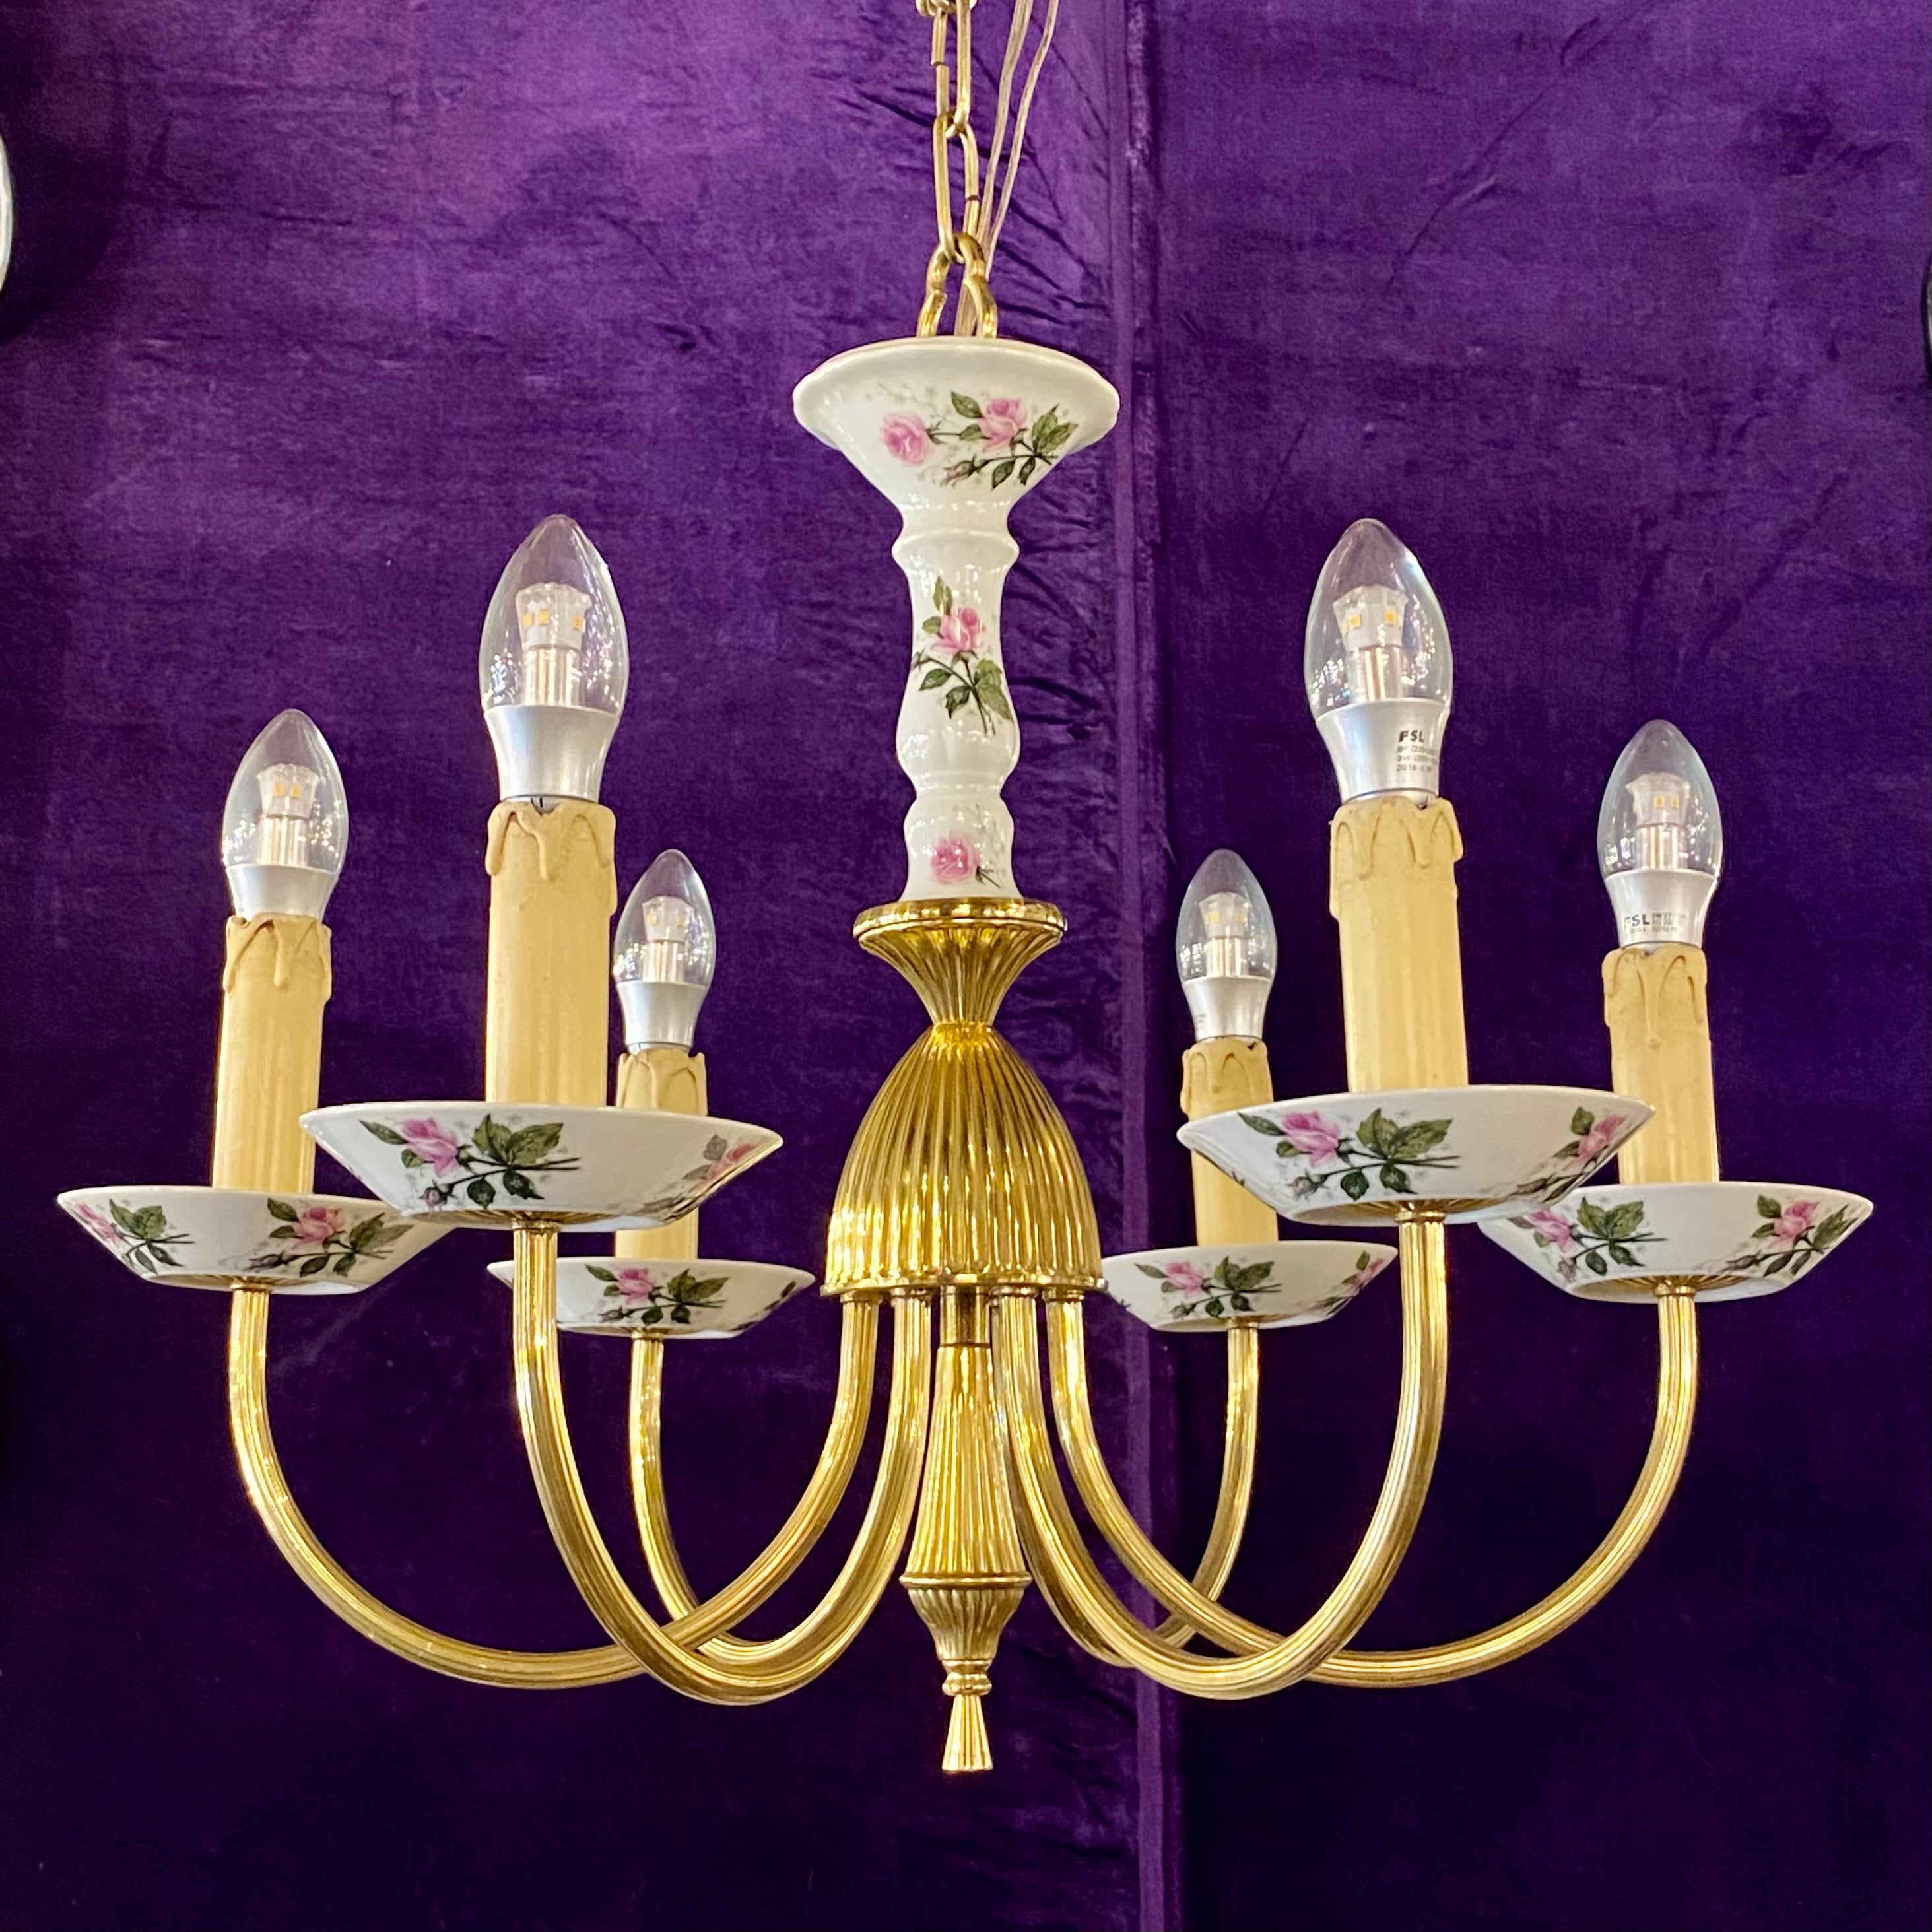 Elegant Brass Chandelier with Hand Painted Details